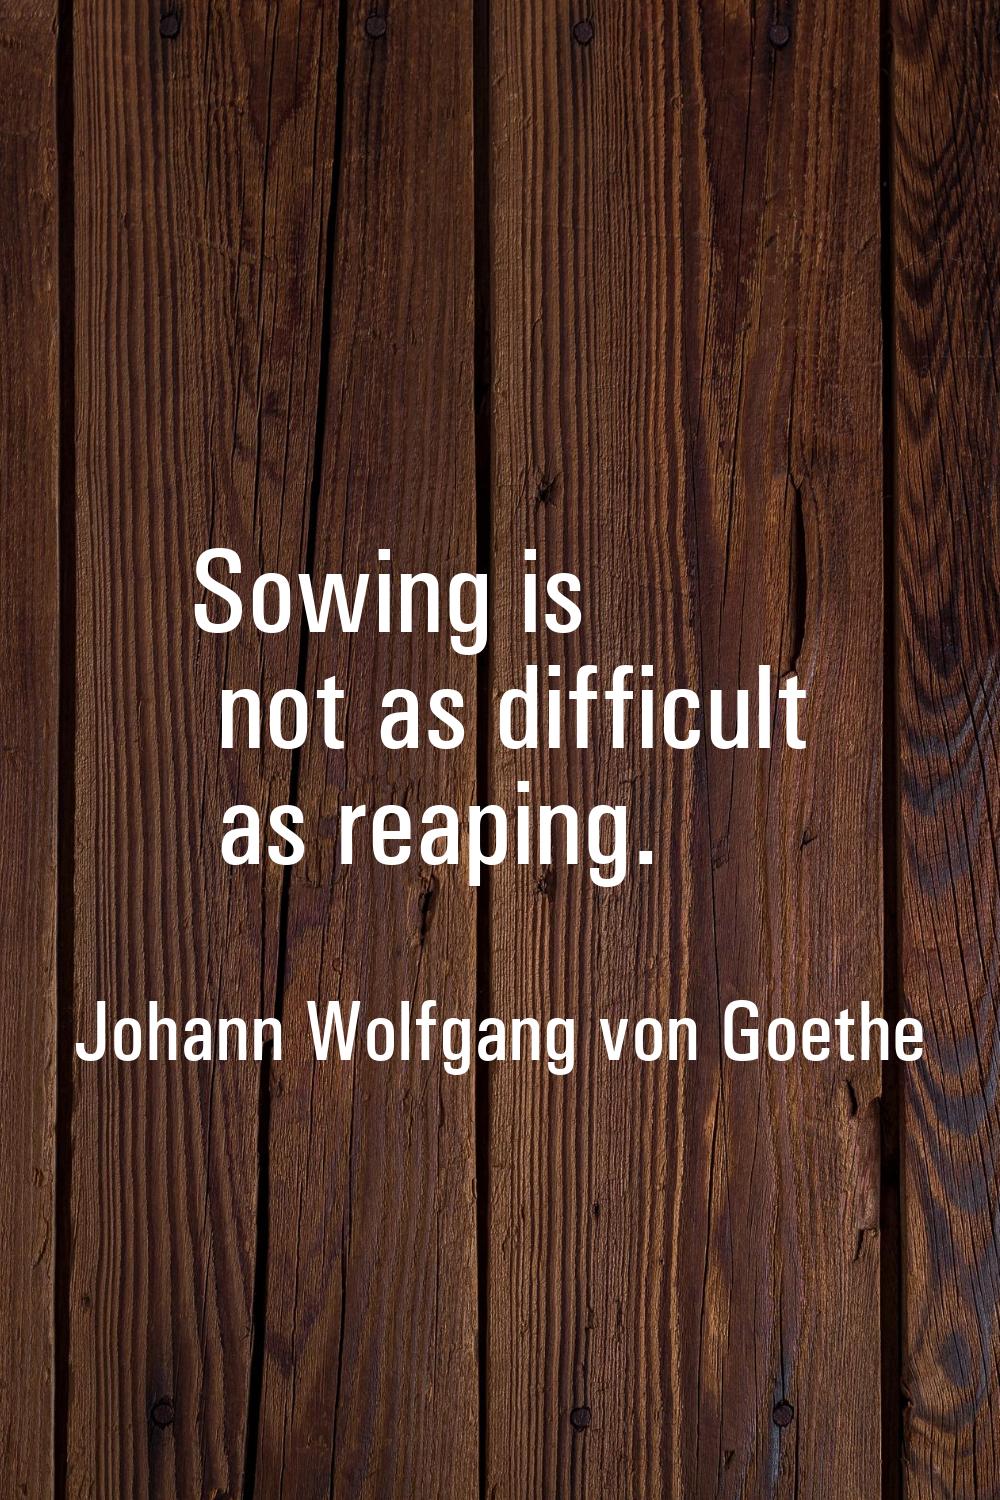 Sowing is not as difficult as reaping.